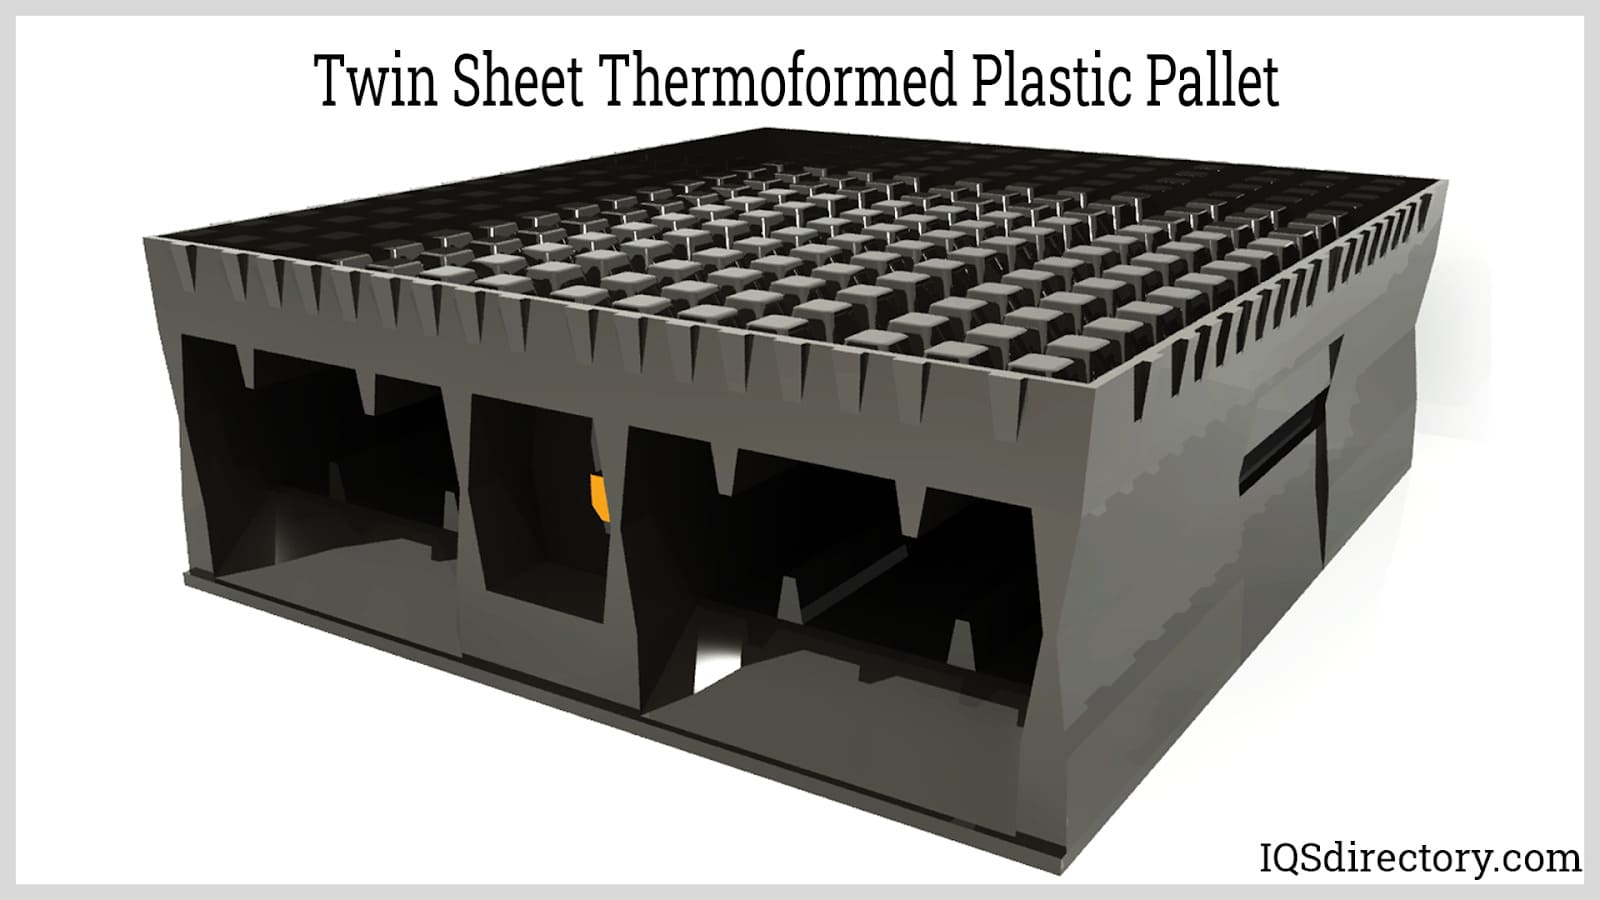 Twin Sheet Thermoformed Plastic Pallet